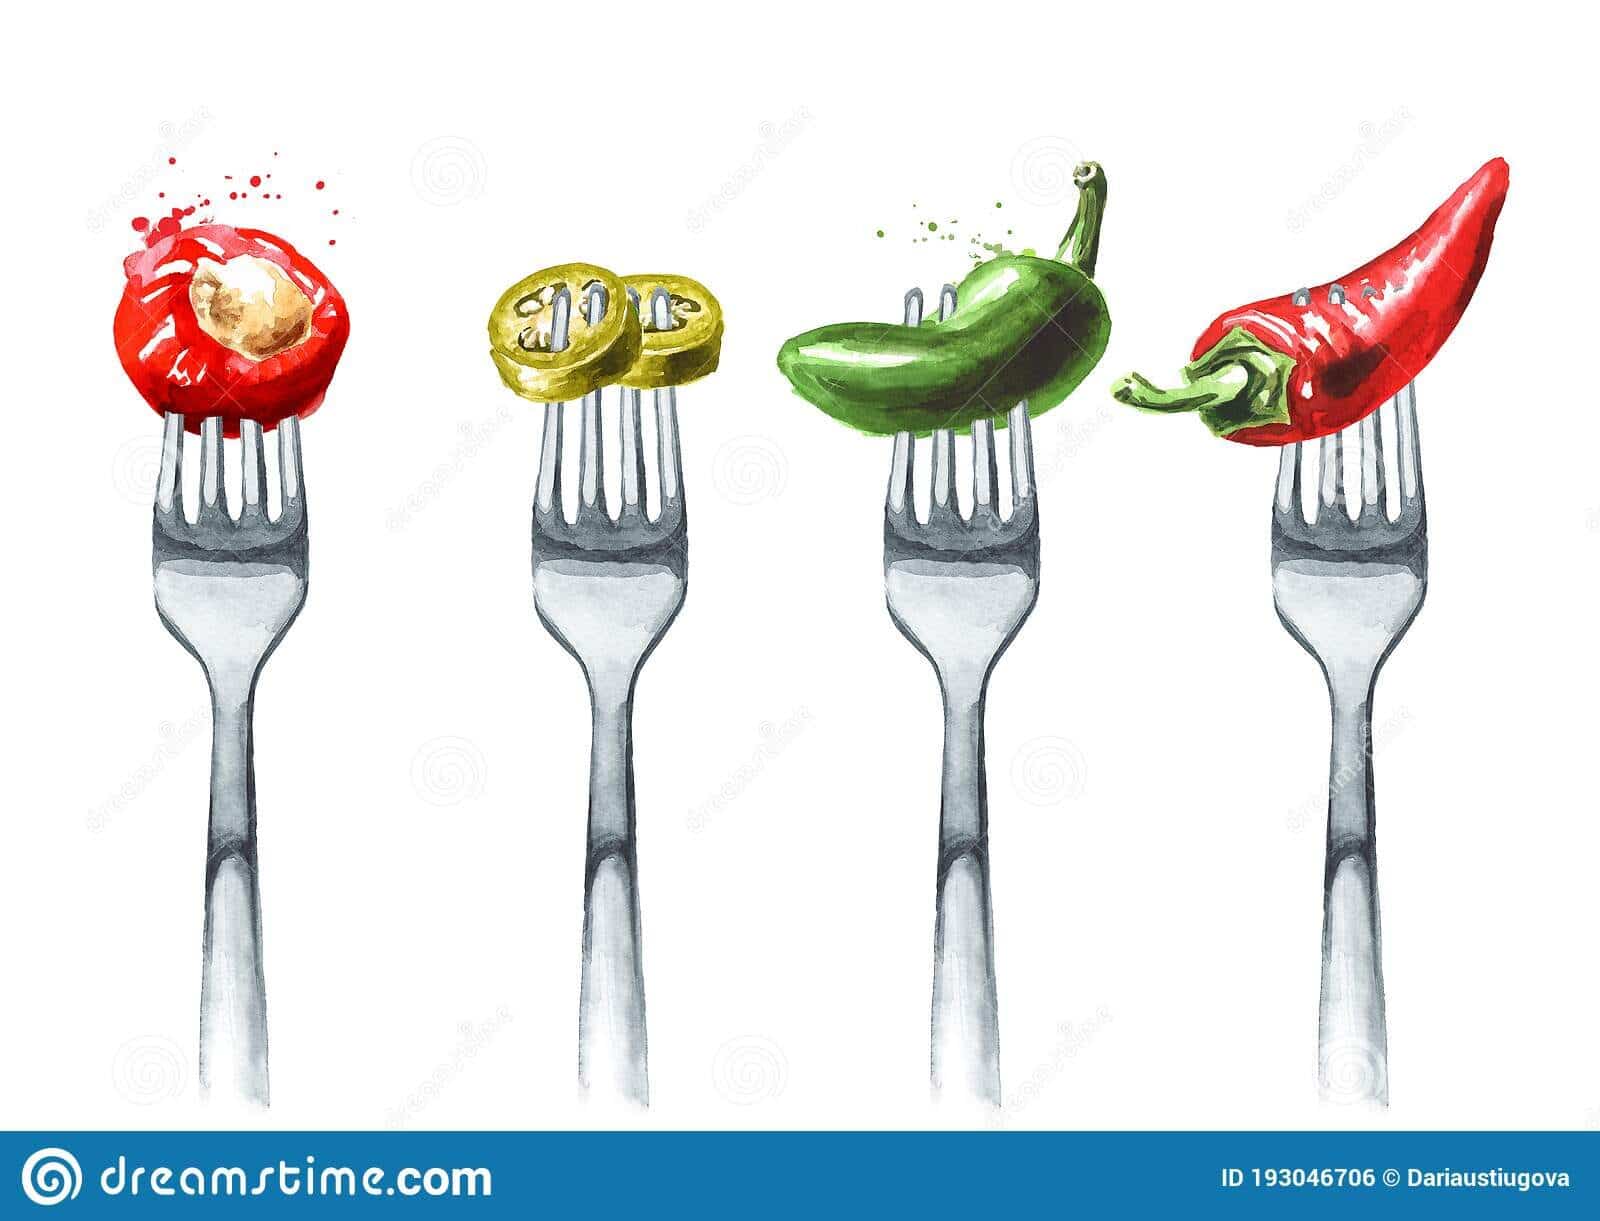 chili-pepper-hot-jalapeno-stuffed-pepper-fork-concept-diet-healthy-eating-hand-drawn-watercolor-illustration-chili-193046706-6666160